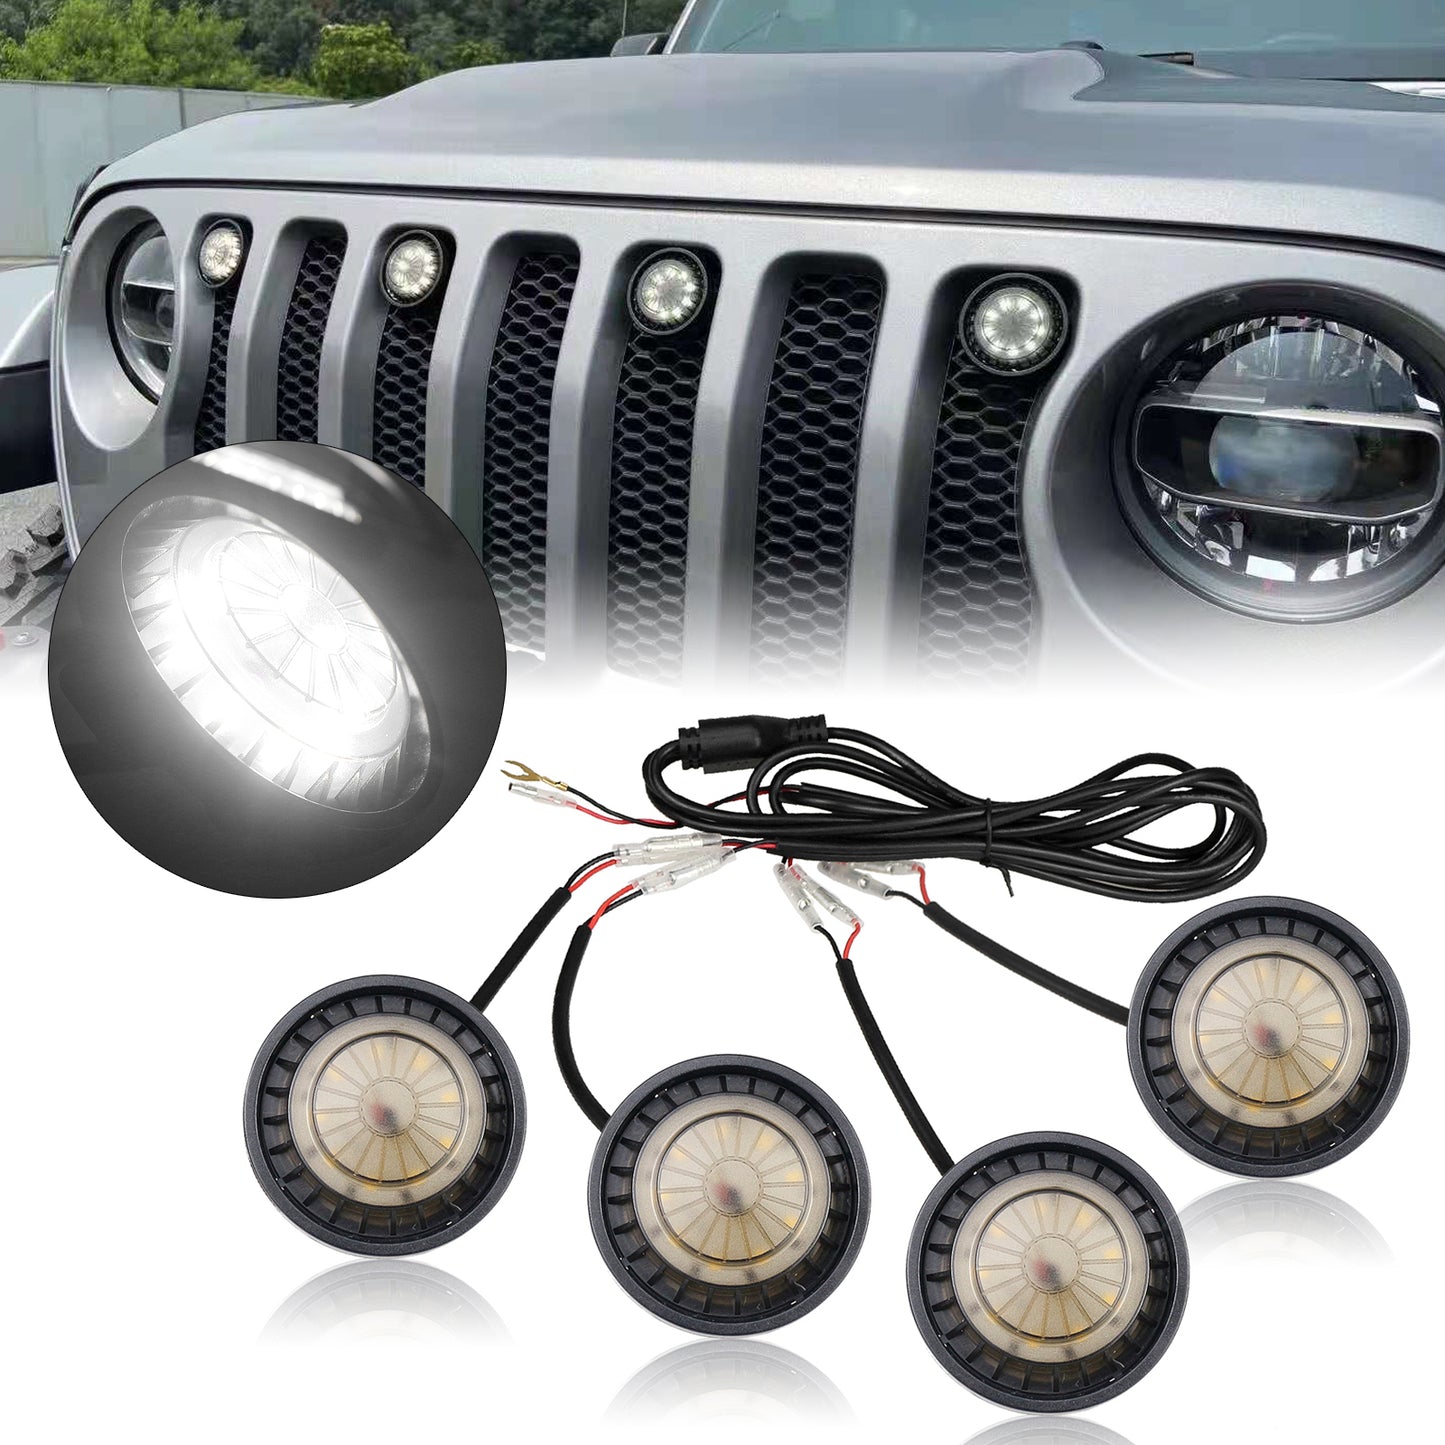 MAD BABOON LED grille Marker Light fits for 18-23 JEEP Wrangler JL (amber cover yellow light/smoke len cover yellow light/smoke len cover white light)